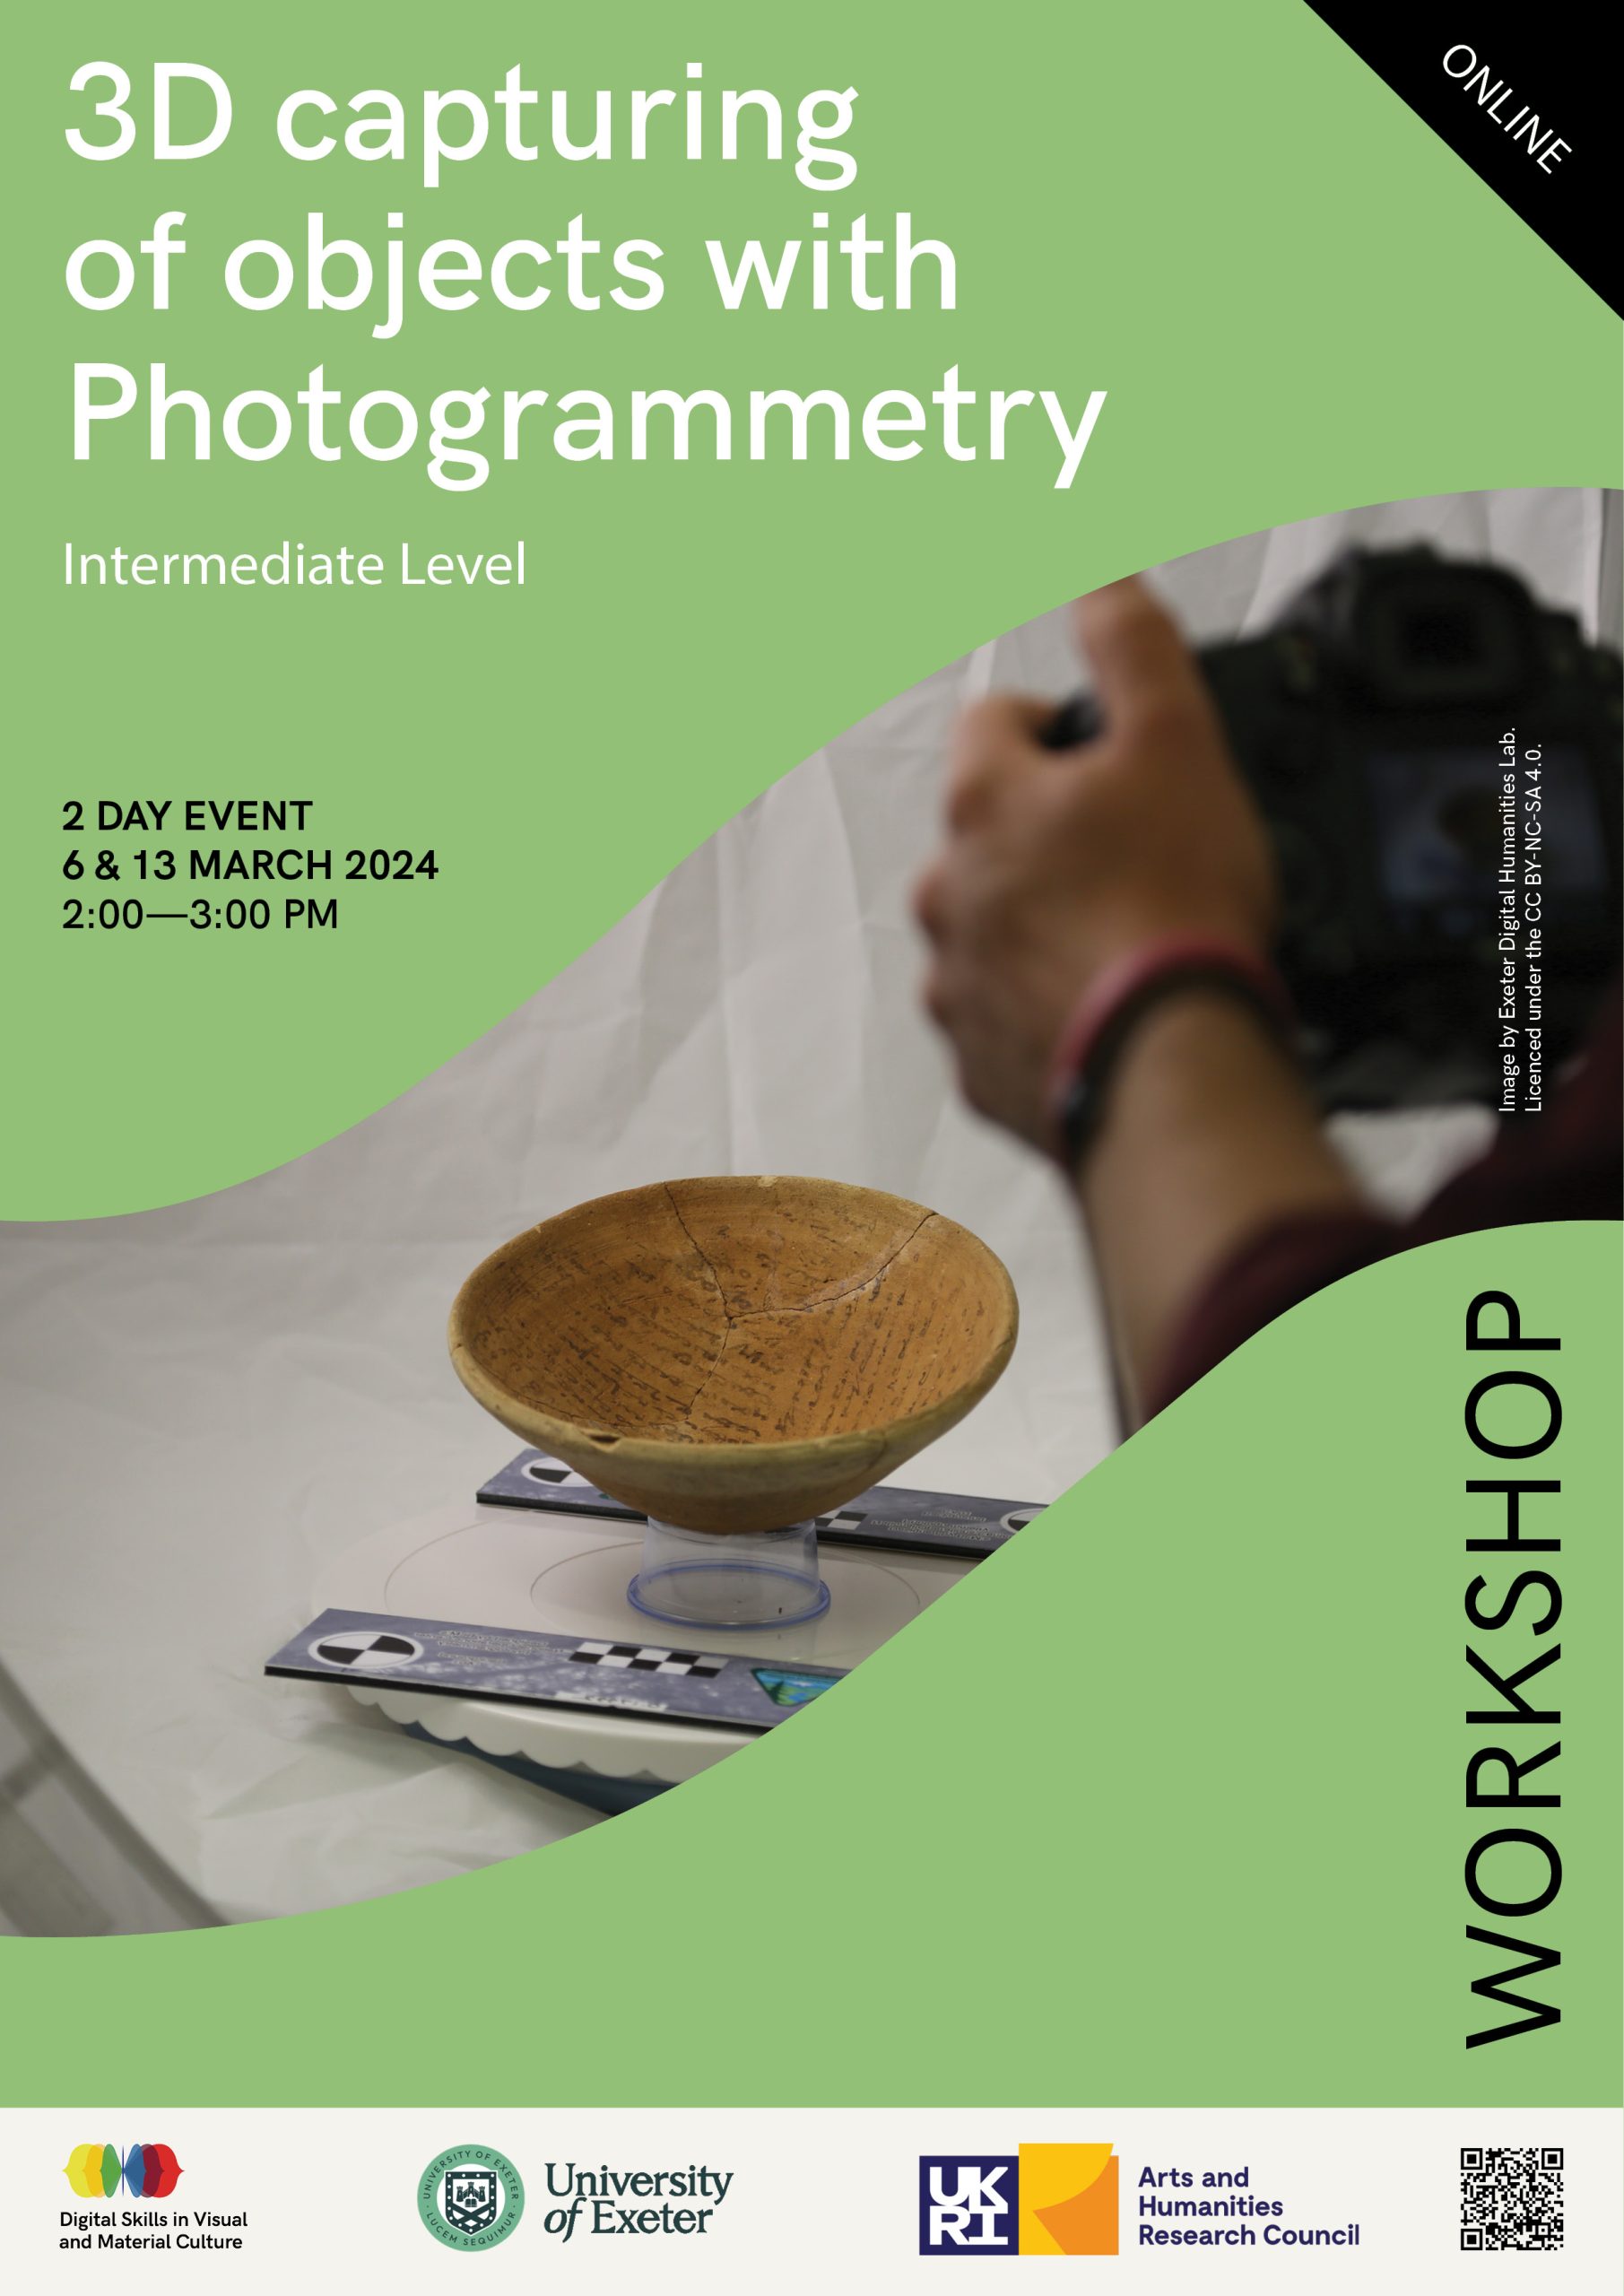 Workshop: 3D Capturing of objects with Photogrammetry (intermediate level)